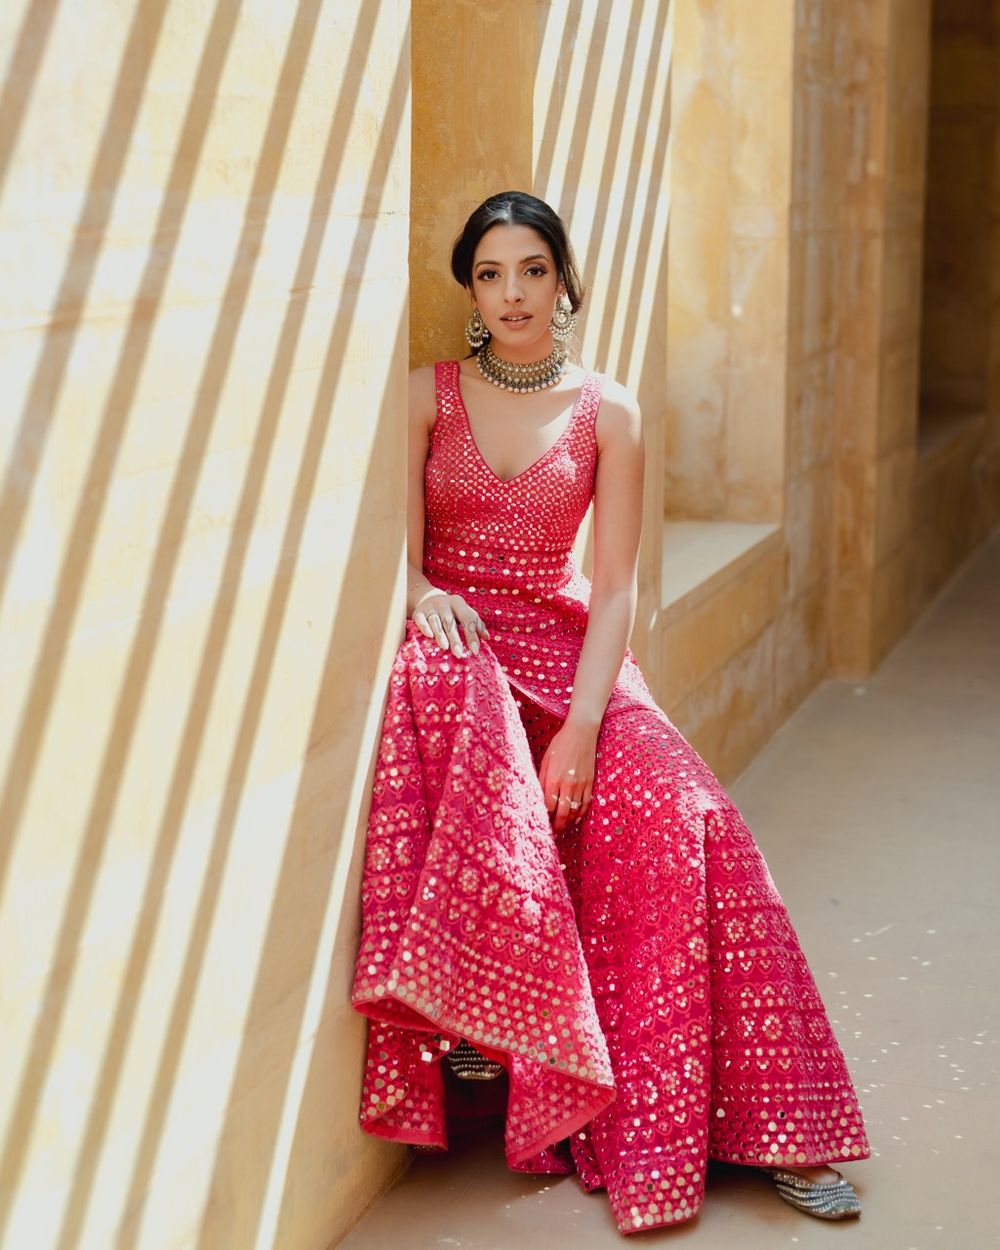 Photo of Pretty bright pink sharara look with mirrorwork detailing